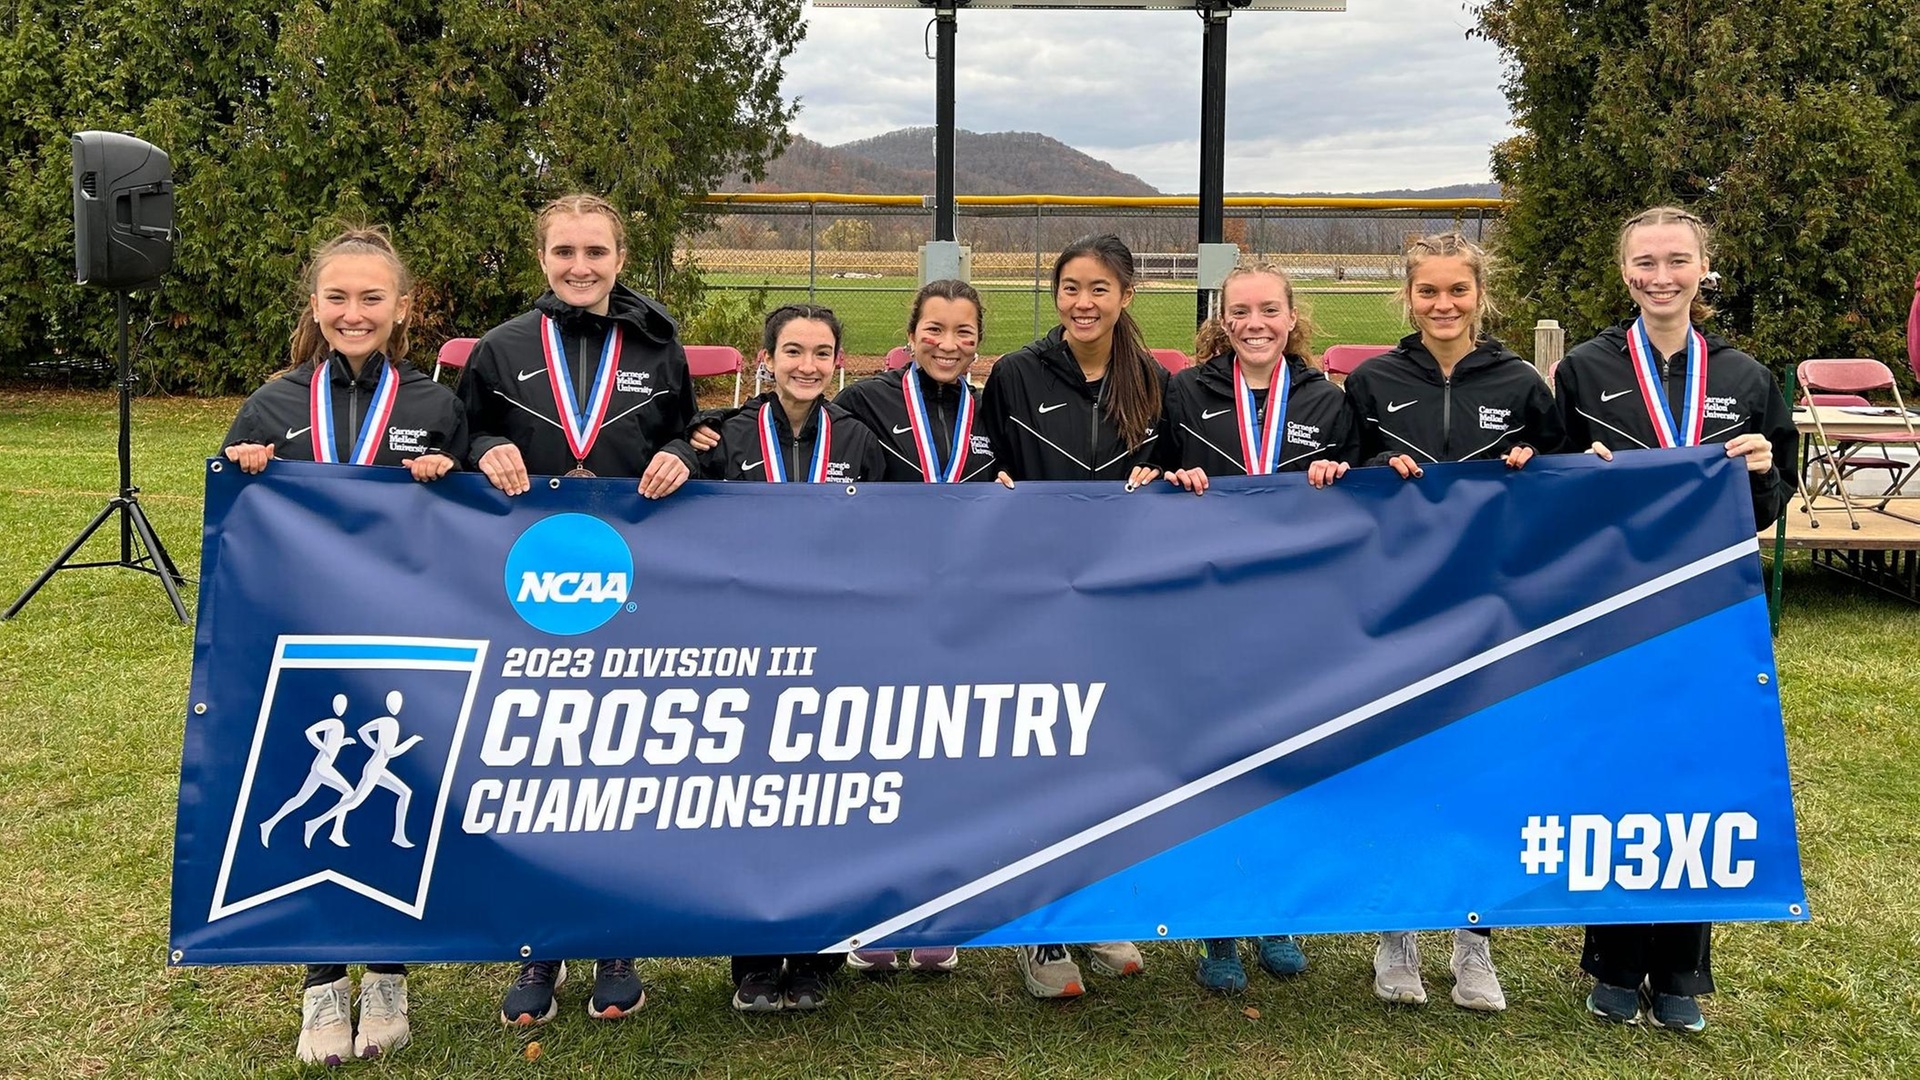 group of women wearing black track suits holding a banner that is blue and says 2023 Division III Cross Country Championships